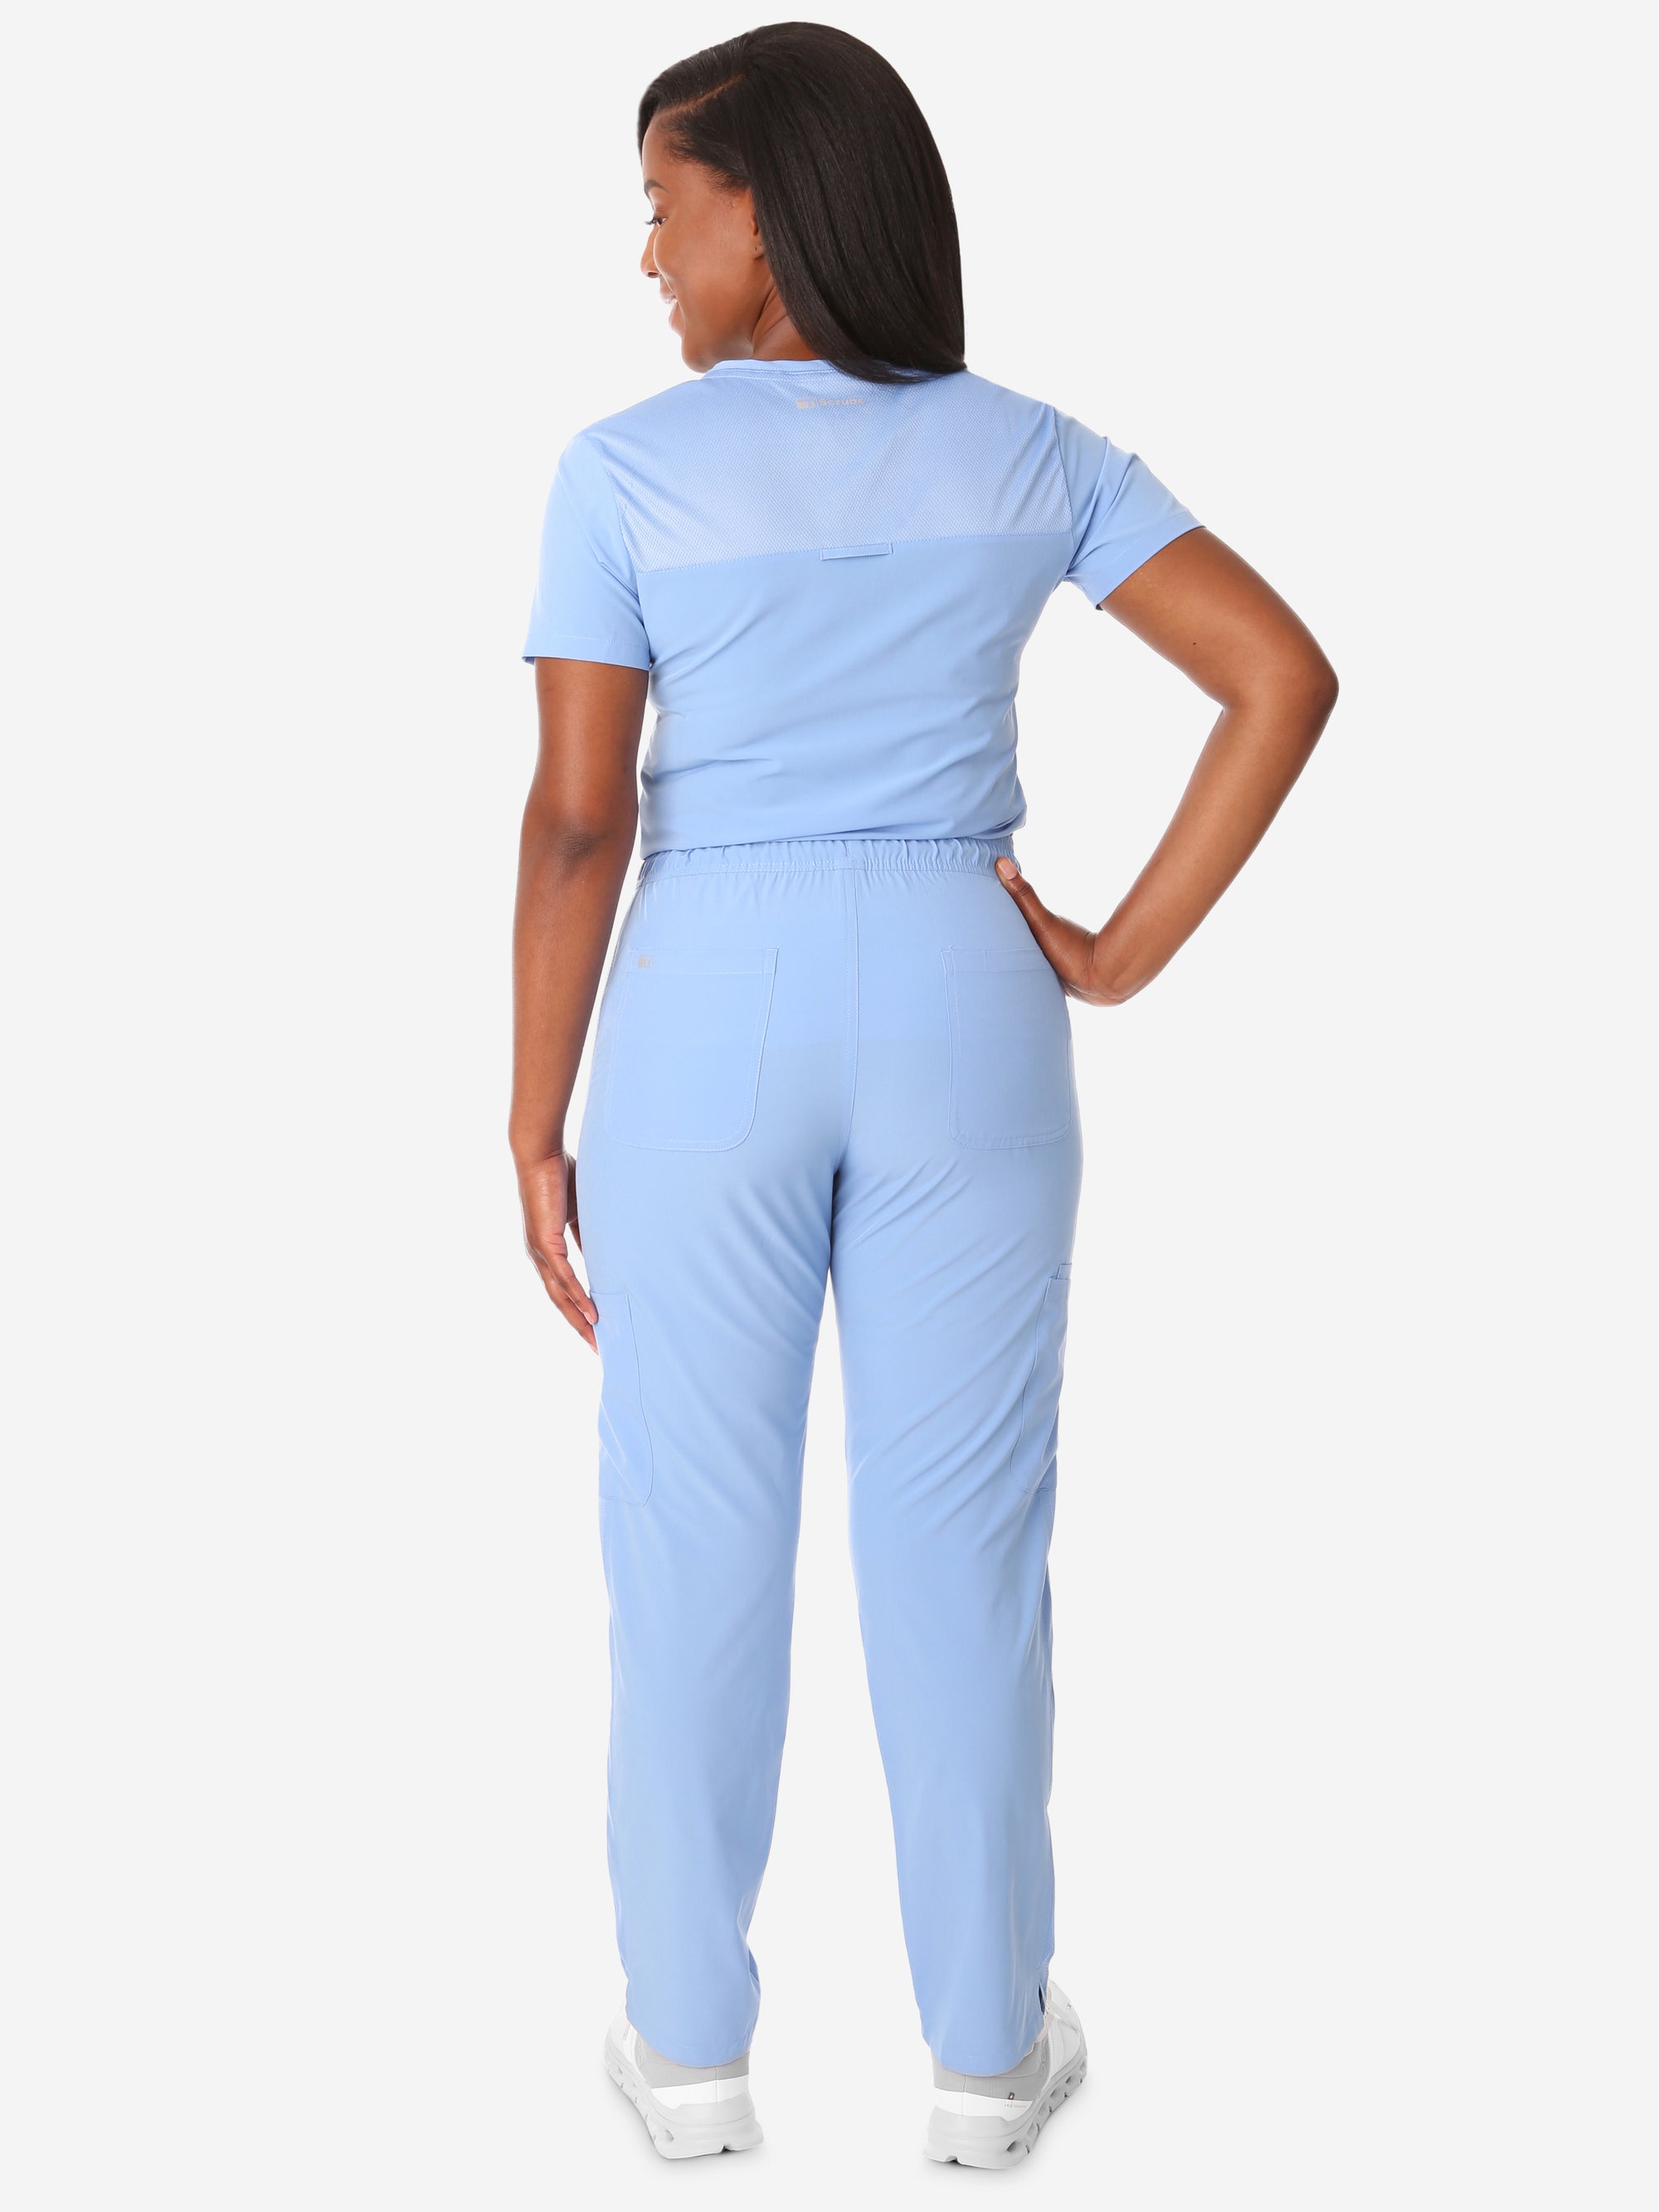 TiScrubs Ceil Blue Women&#39;s Stretch 9-Pocket Pants and One-Pocket Tuckable Top Back View Full Body